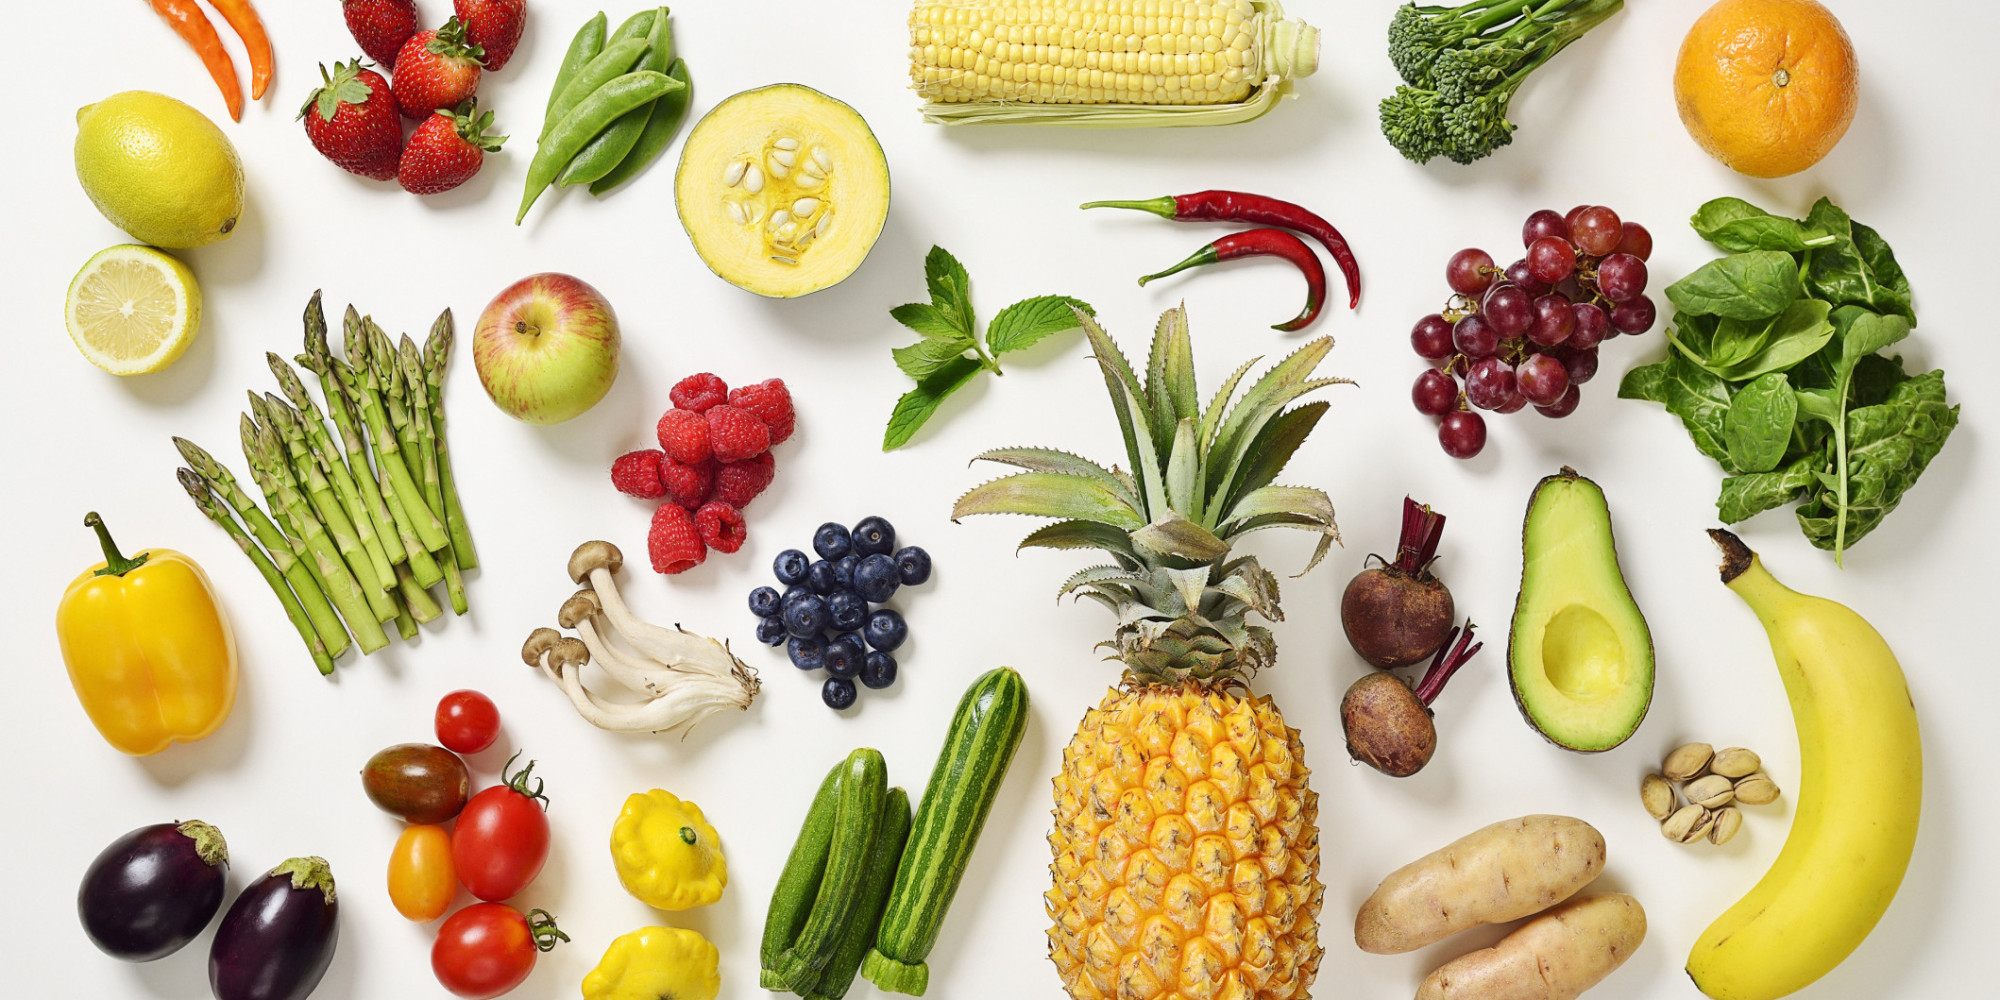 5 Things You Should Know Before Trying an Elimination Diet | HuffPost